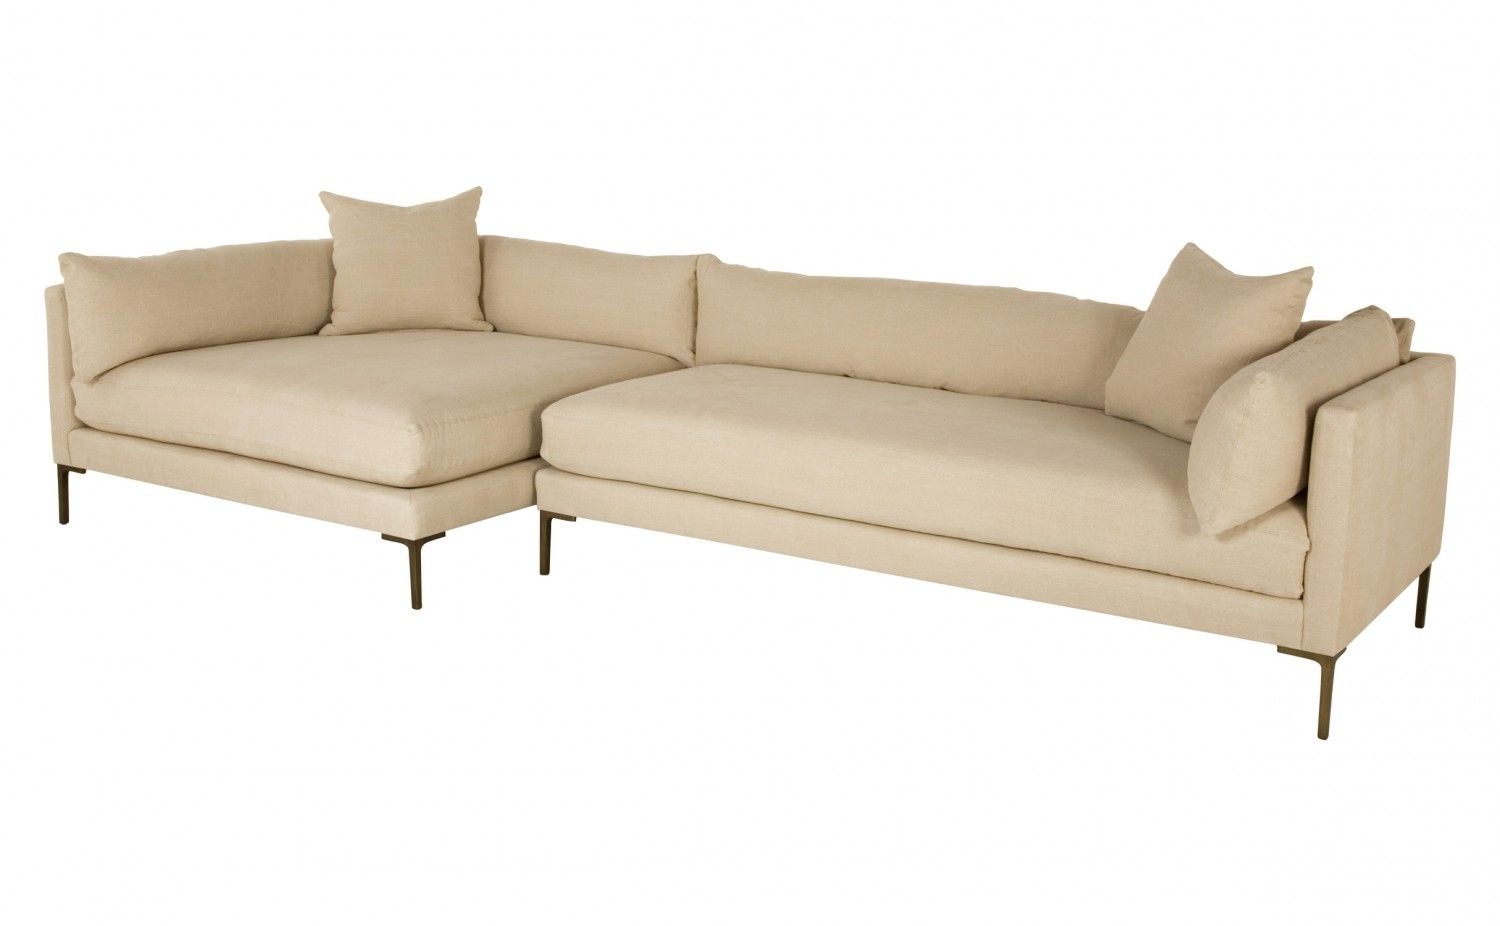 Sydney Sectional | Jayson Home For Sydney Sectional Sofas (View 7 of 10)